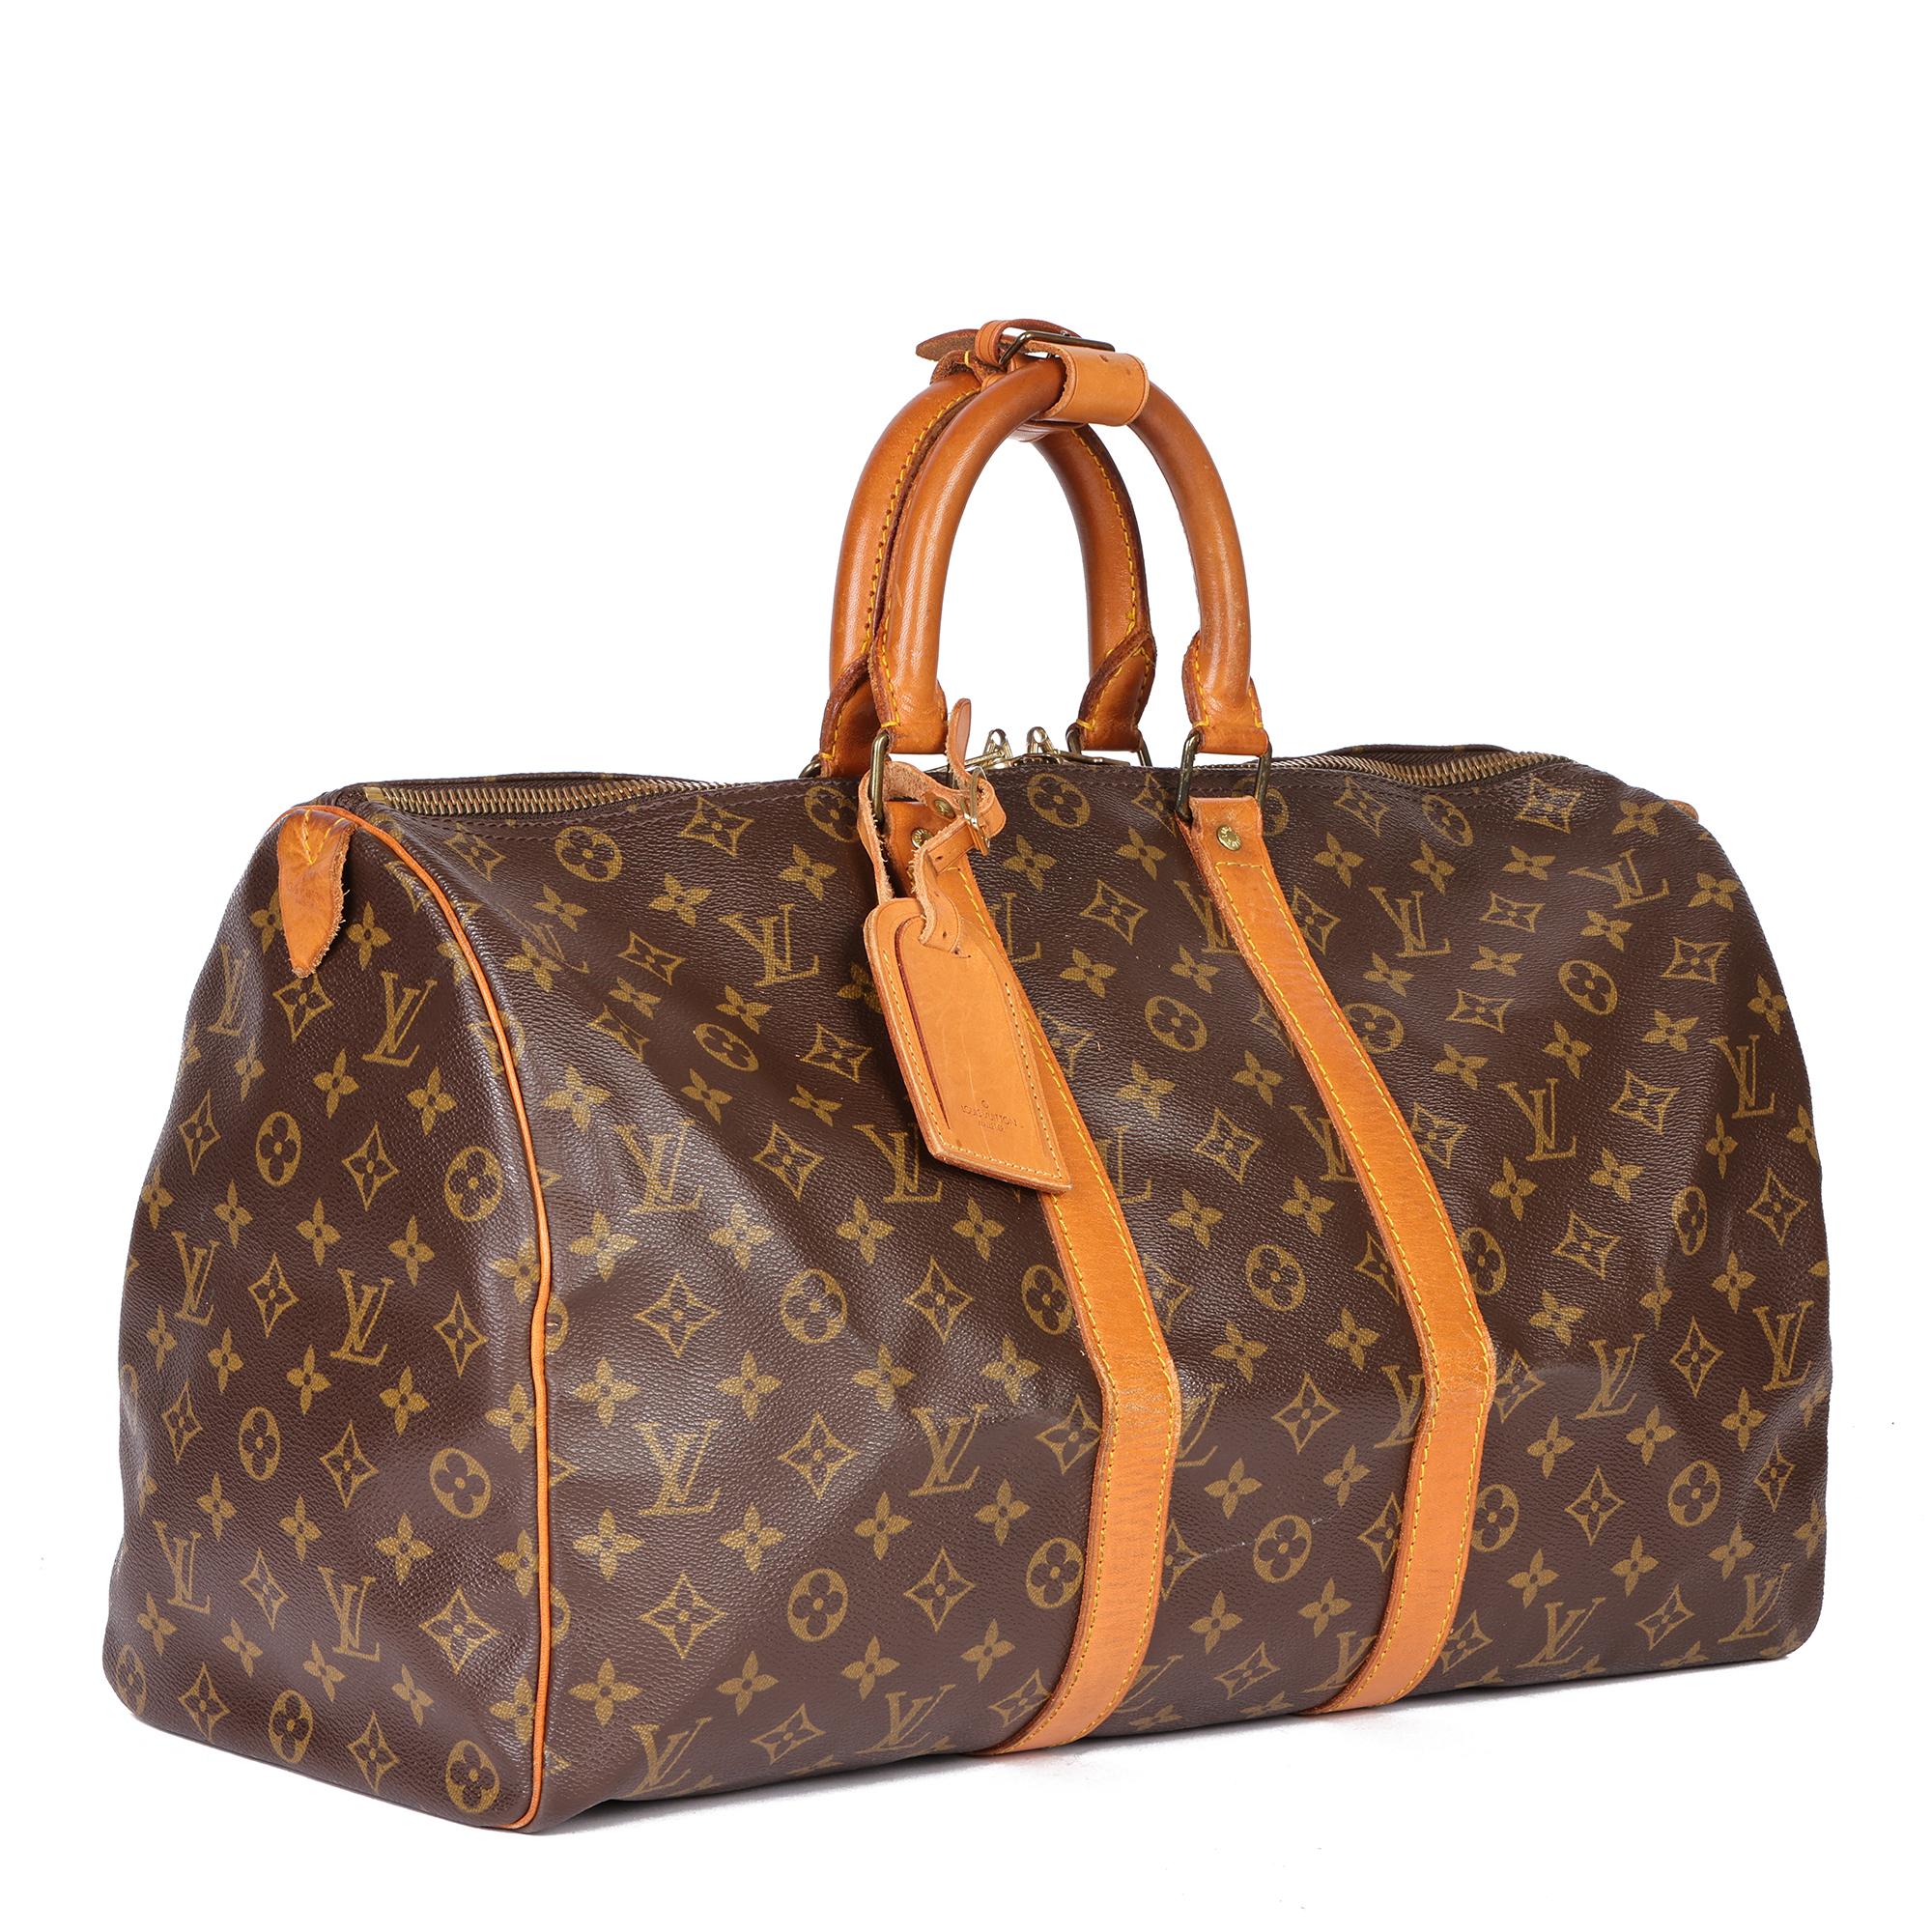 LOUIS VUITTON
Brown Monogram Coated Canvas & Vachetta Leather Vintage Keepall 45

Serial Number: FO893
Age (Circa): 1983
Accompanied By: Luggage Tag, Handle Keeper
Authenticity Details: Date Stamp (Made in France)
Gender: Ladies
Type: